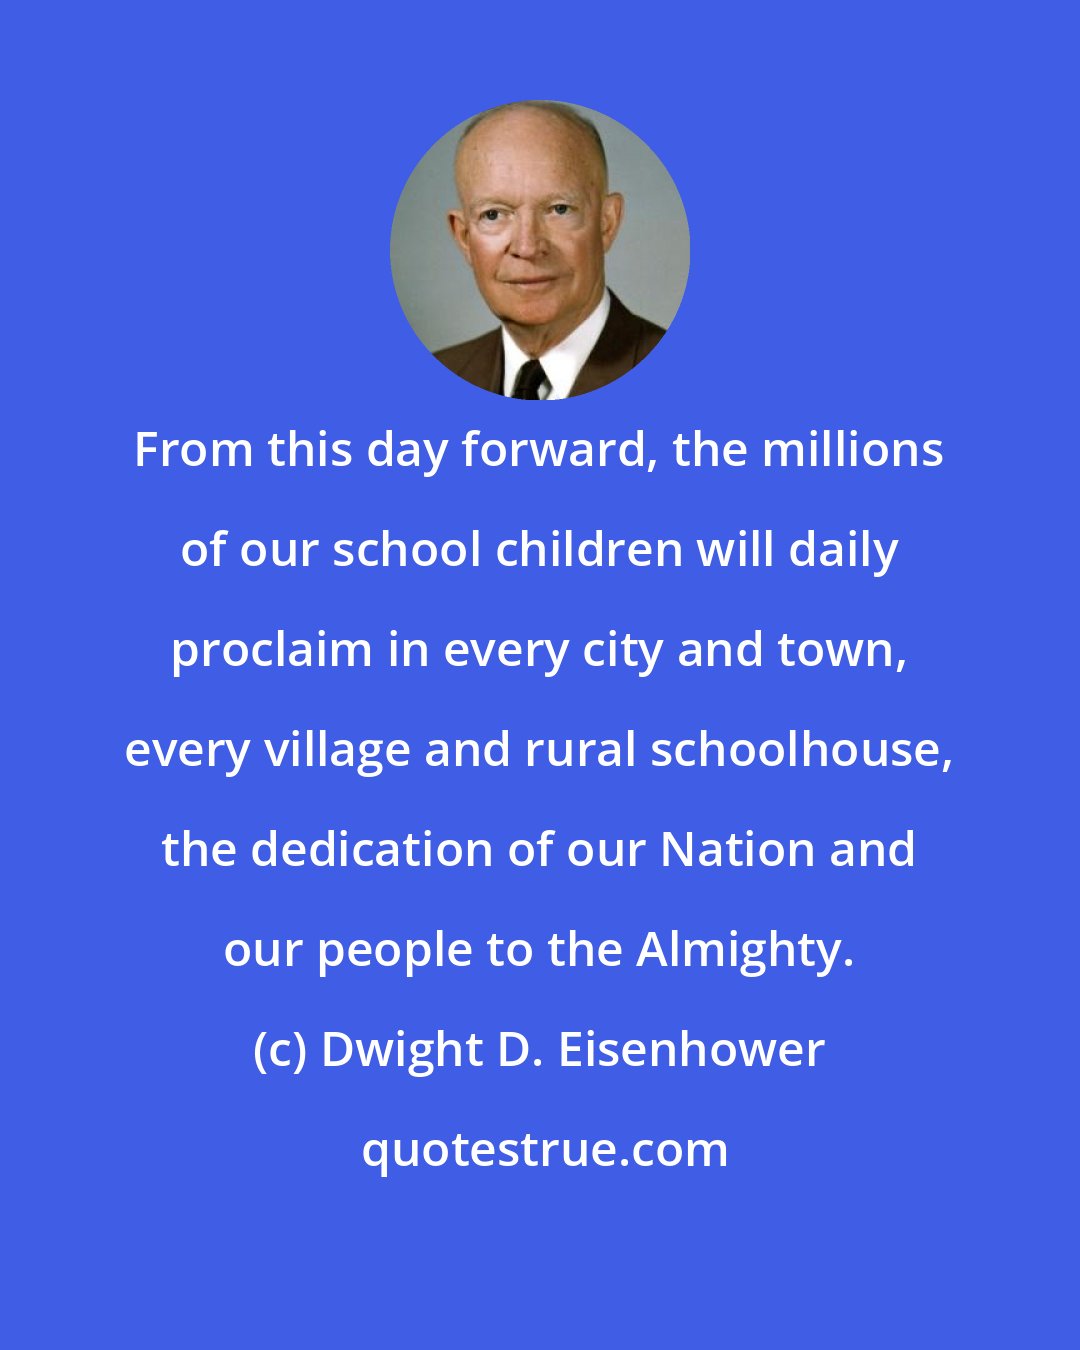 Dwight D. Eisenhower: From this day forward, the millions of our school children will daily proclaim in every city and town, every village and rural schoolhouse, the dedication of our Nation and our people to the Almighty.